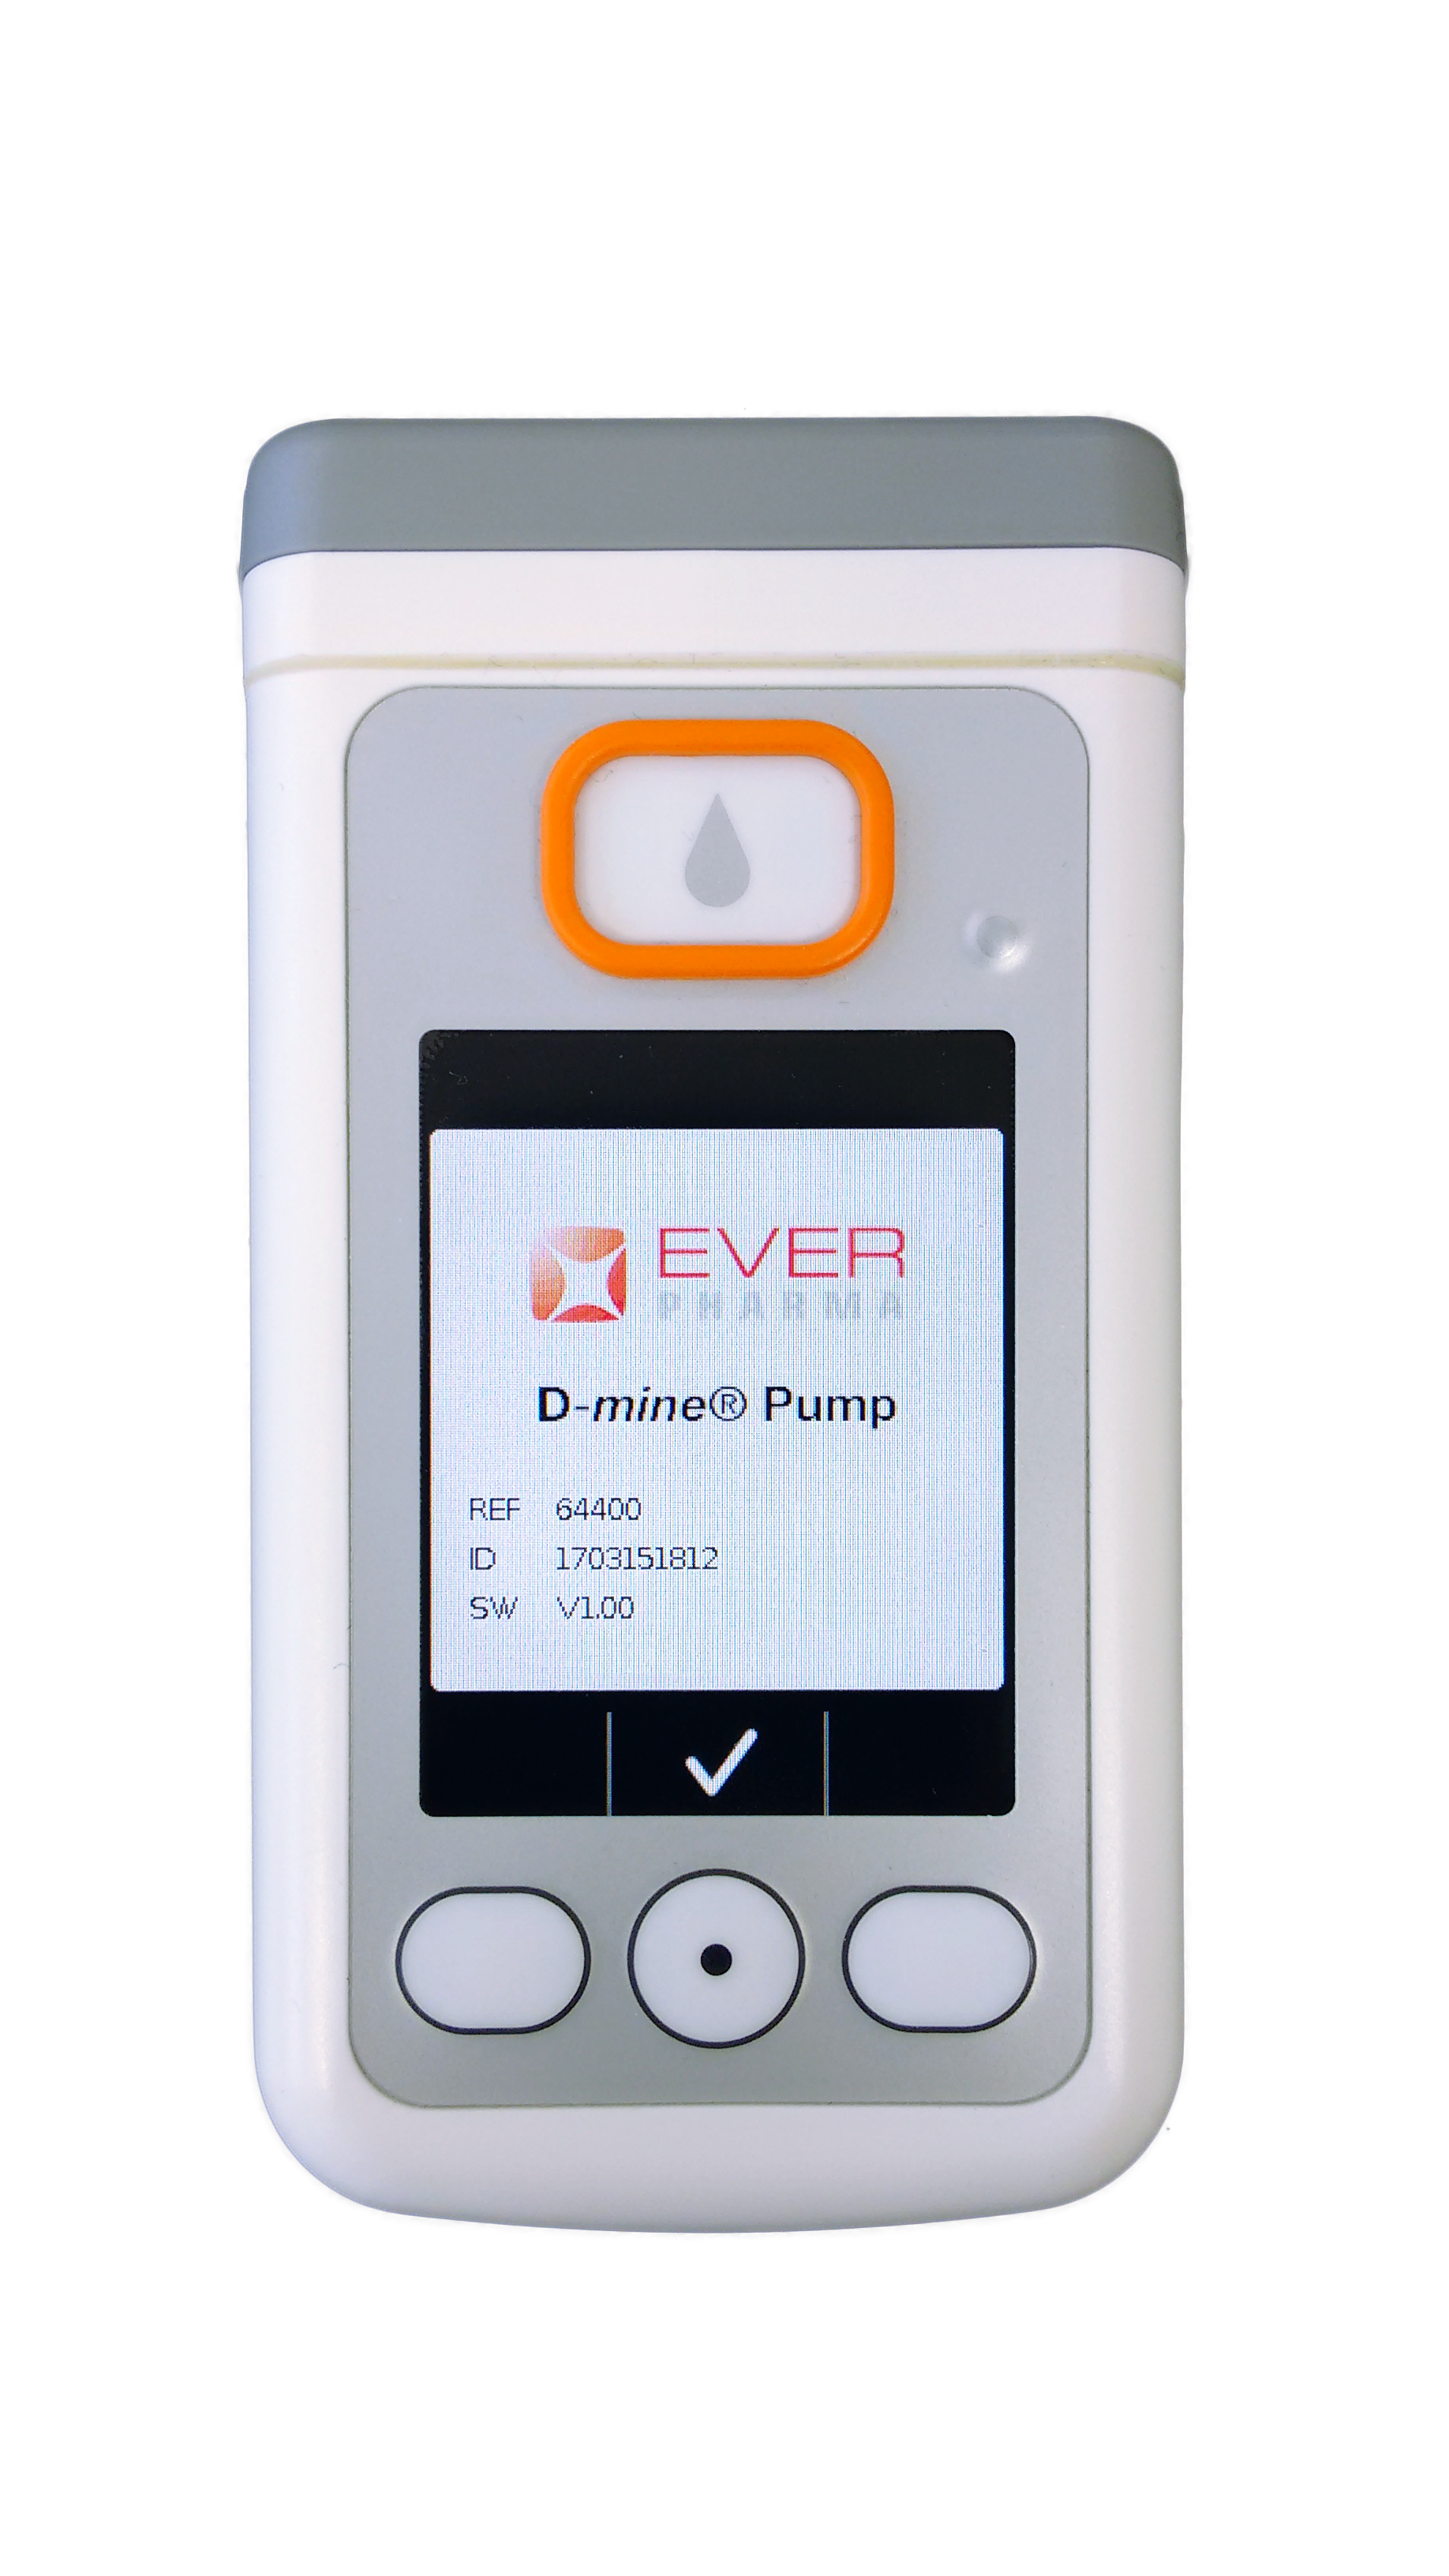 Innovative micro-infusion pump from Gerresheimer subsidiary Sensile Medical developed and successfully launched for EVER Pharma